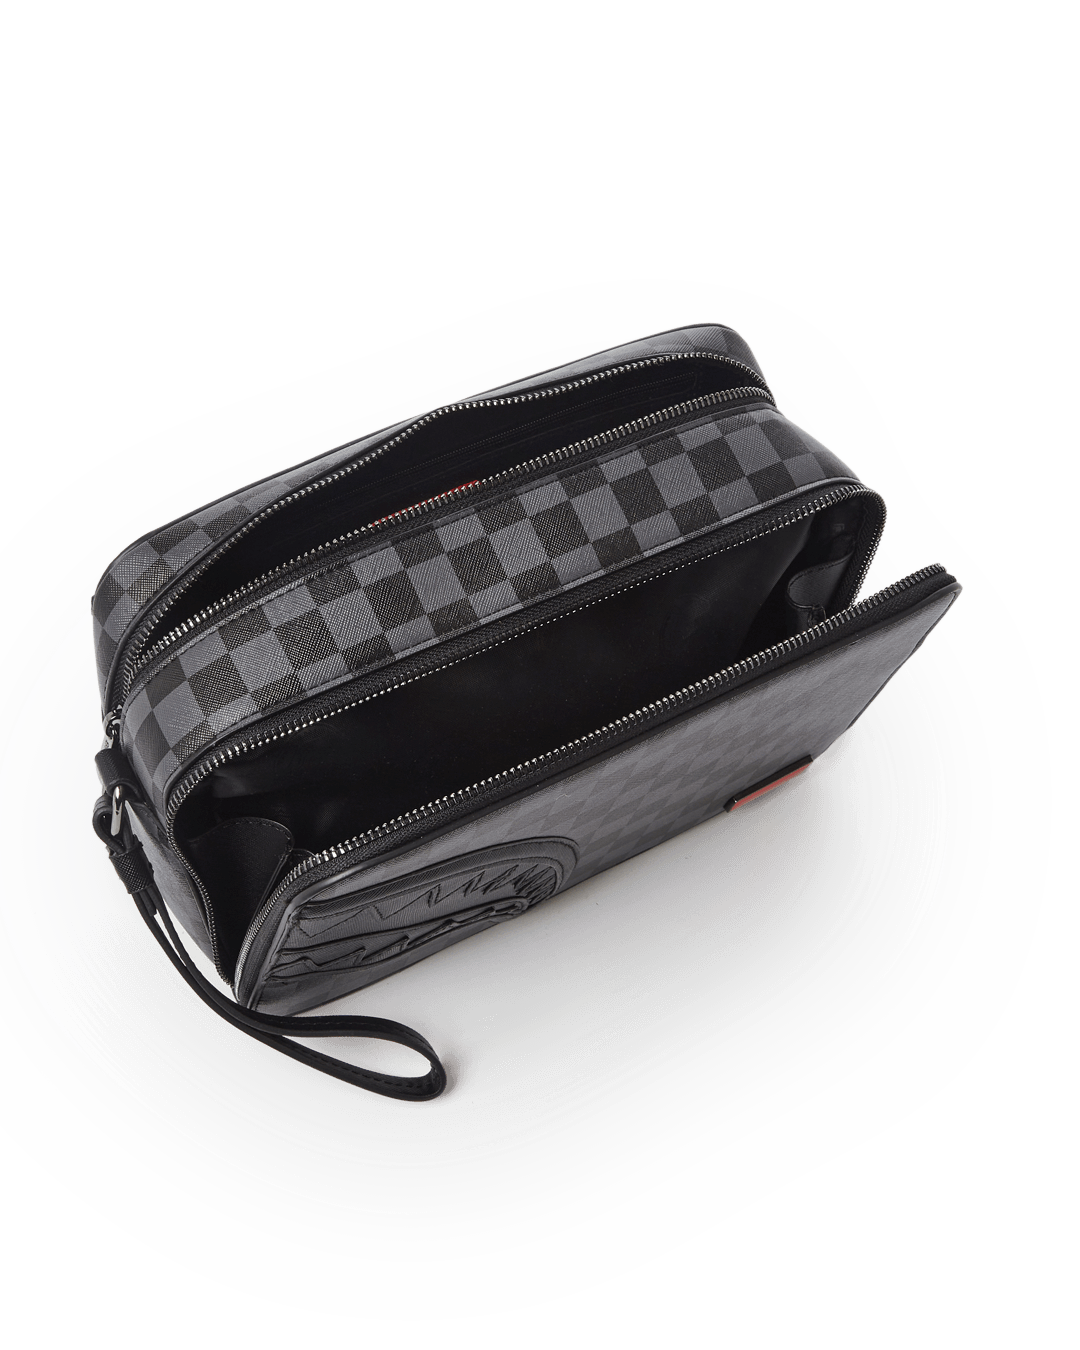 HENNY BLACK TOILETRY BAG - HIGH QUALITY AND INEXPENSIVE - HENNY BLACK TOILETRY BAG HIGH QUALITY AND INEXPENSIVE-01-5